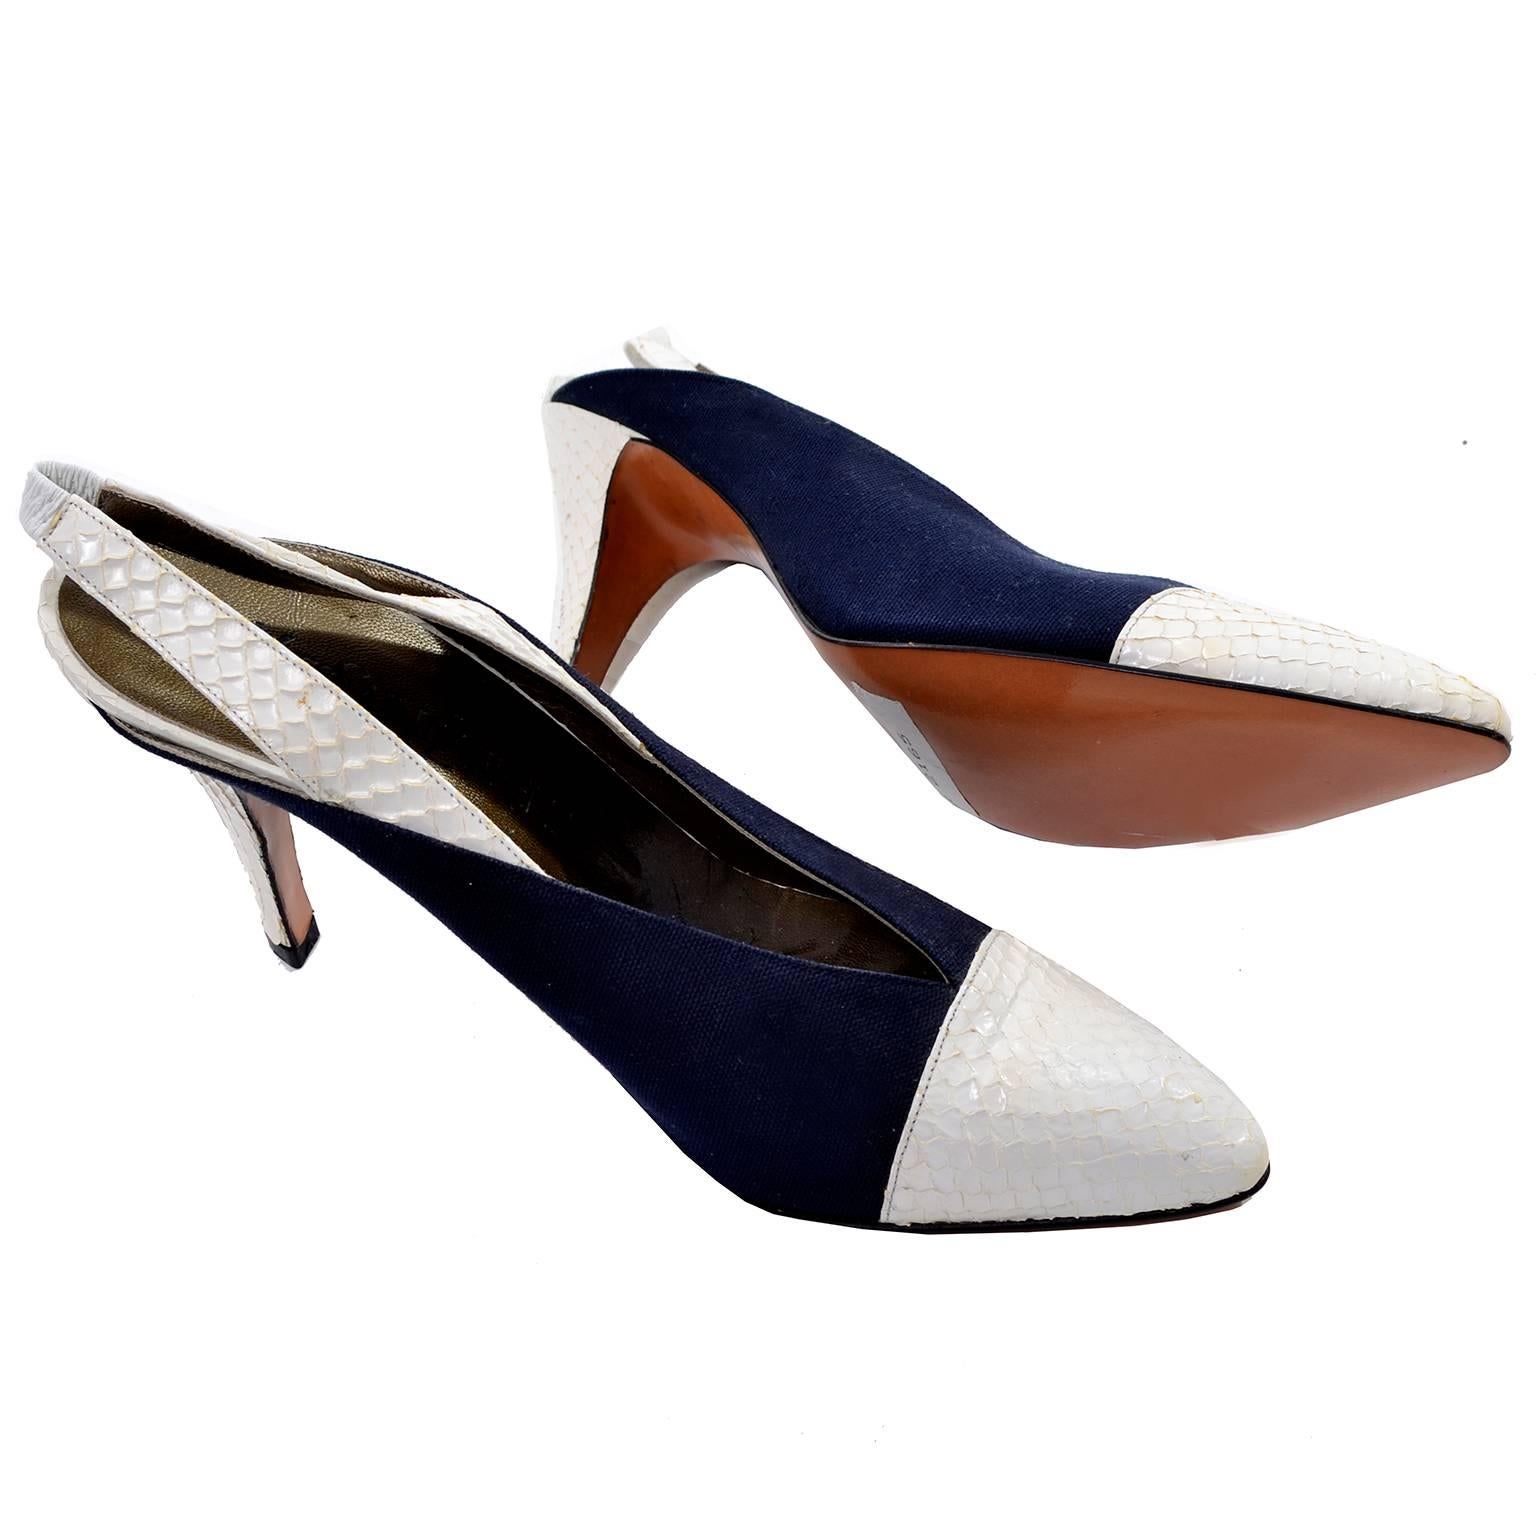 Beautiful Yves Saint Laurent vintage heels with white snakeskin toe, heel, and strap. Slingback style with a pointed toe and navy sides. The slingback strap has a small piece of white elastic in the back for comfort and ease slipping into these